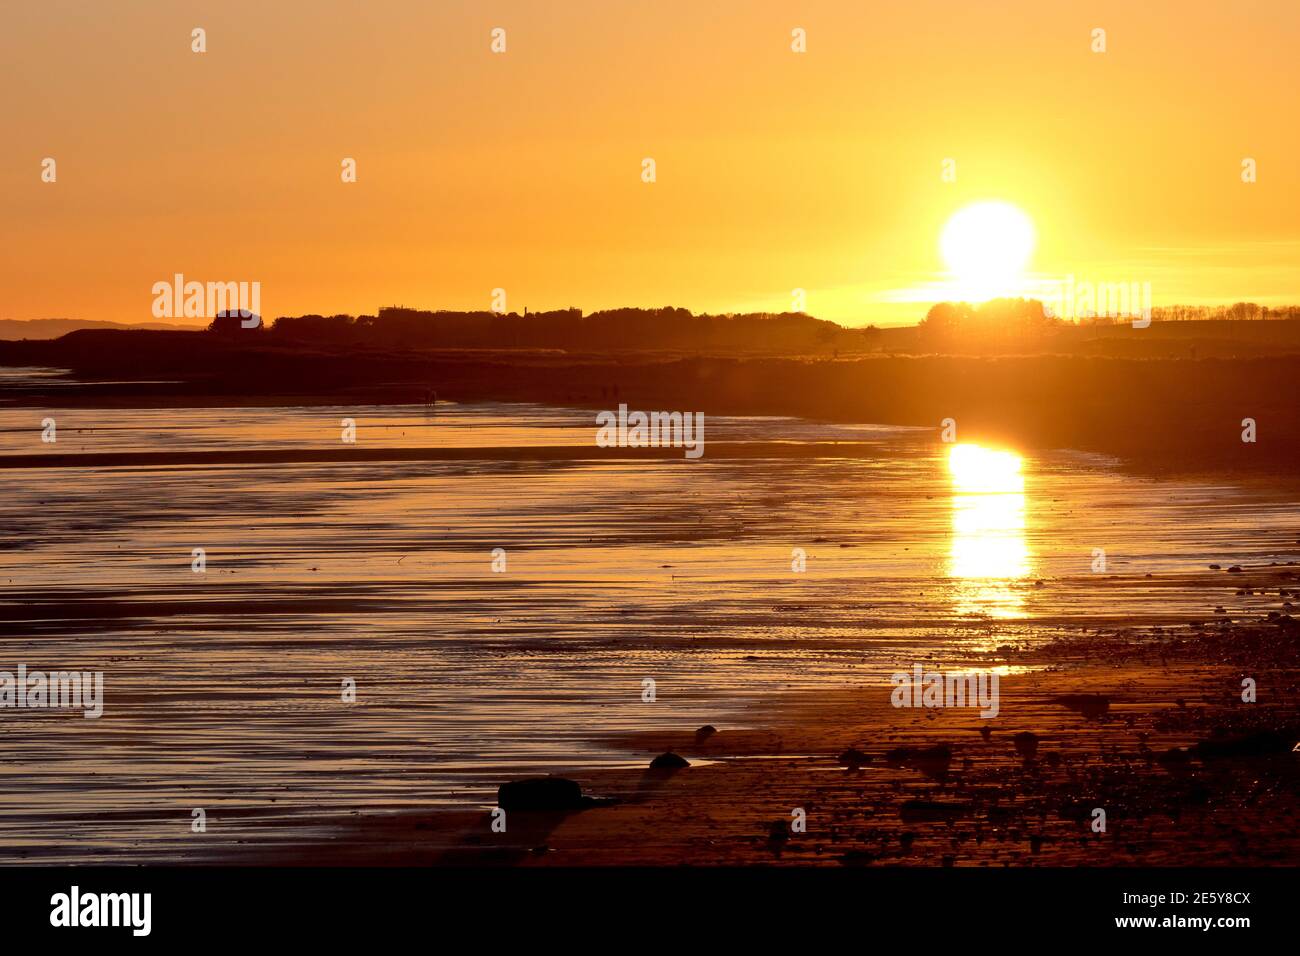 The sun begins to set over the beach at Arbroath at the end of a winters day, its light reflected in the wet sands. Stock Photo